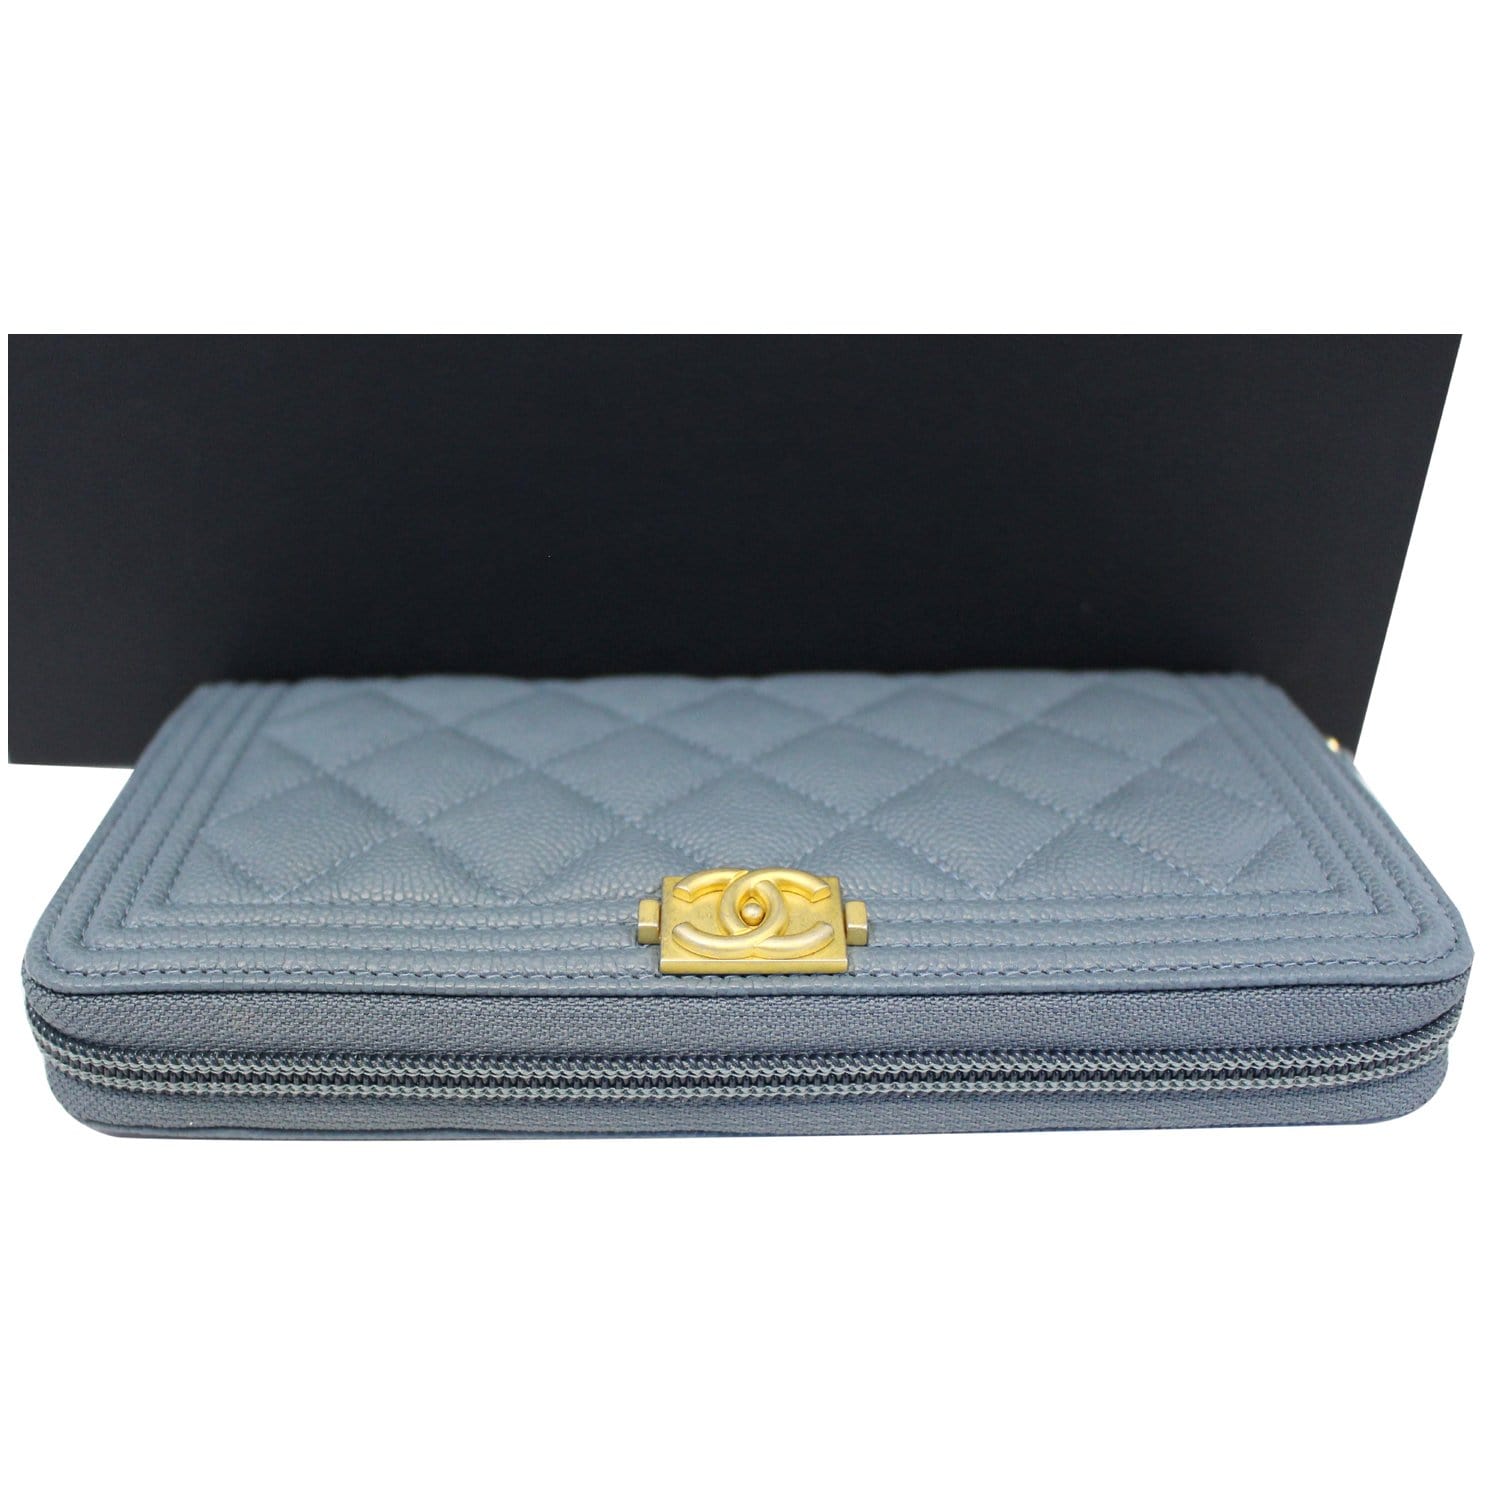 Chanel Boy Small Trifold Wallet Caviar Navy Blue - Kaialux